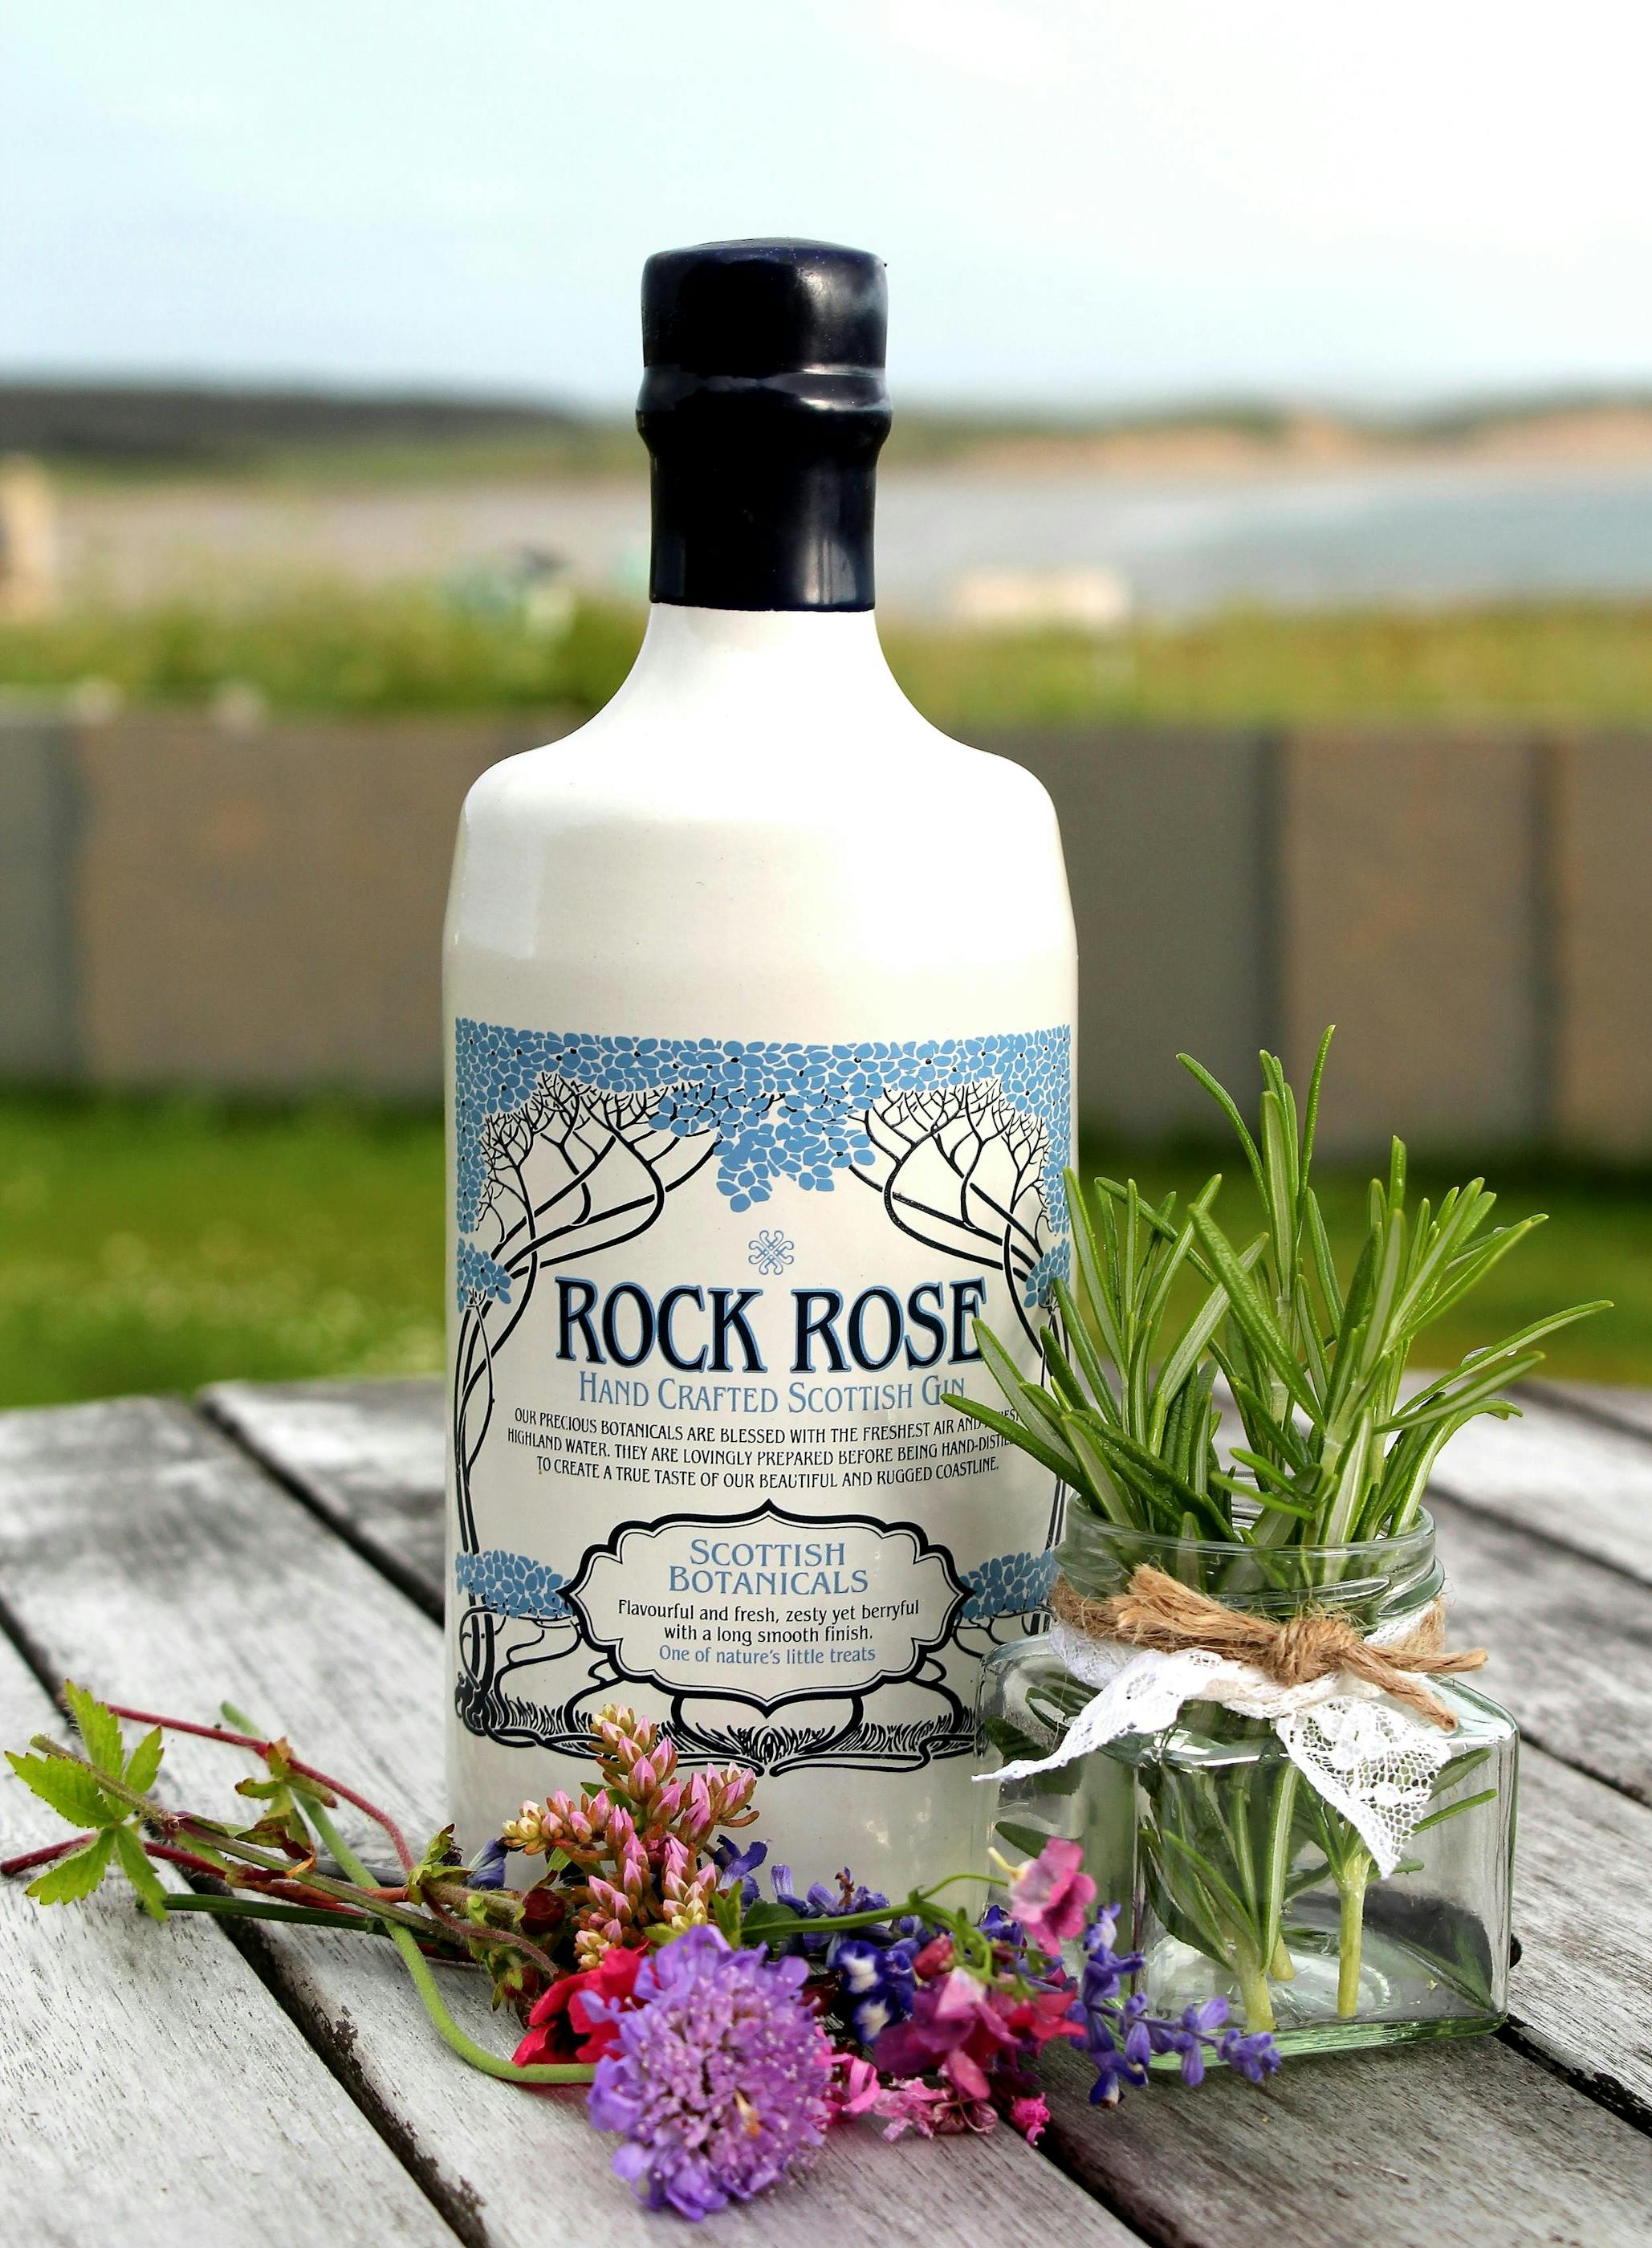 Rock Rose Gin's 500 Mile Gin Journey